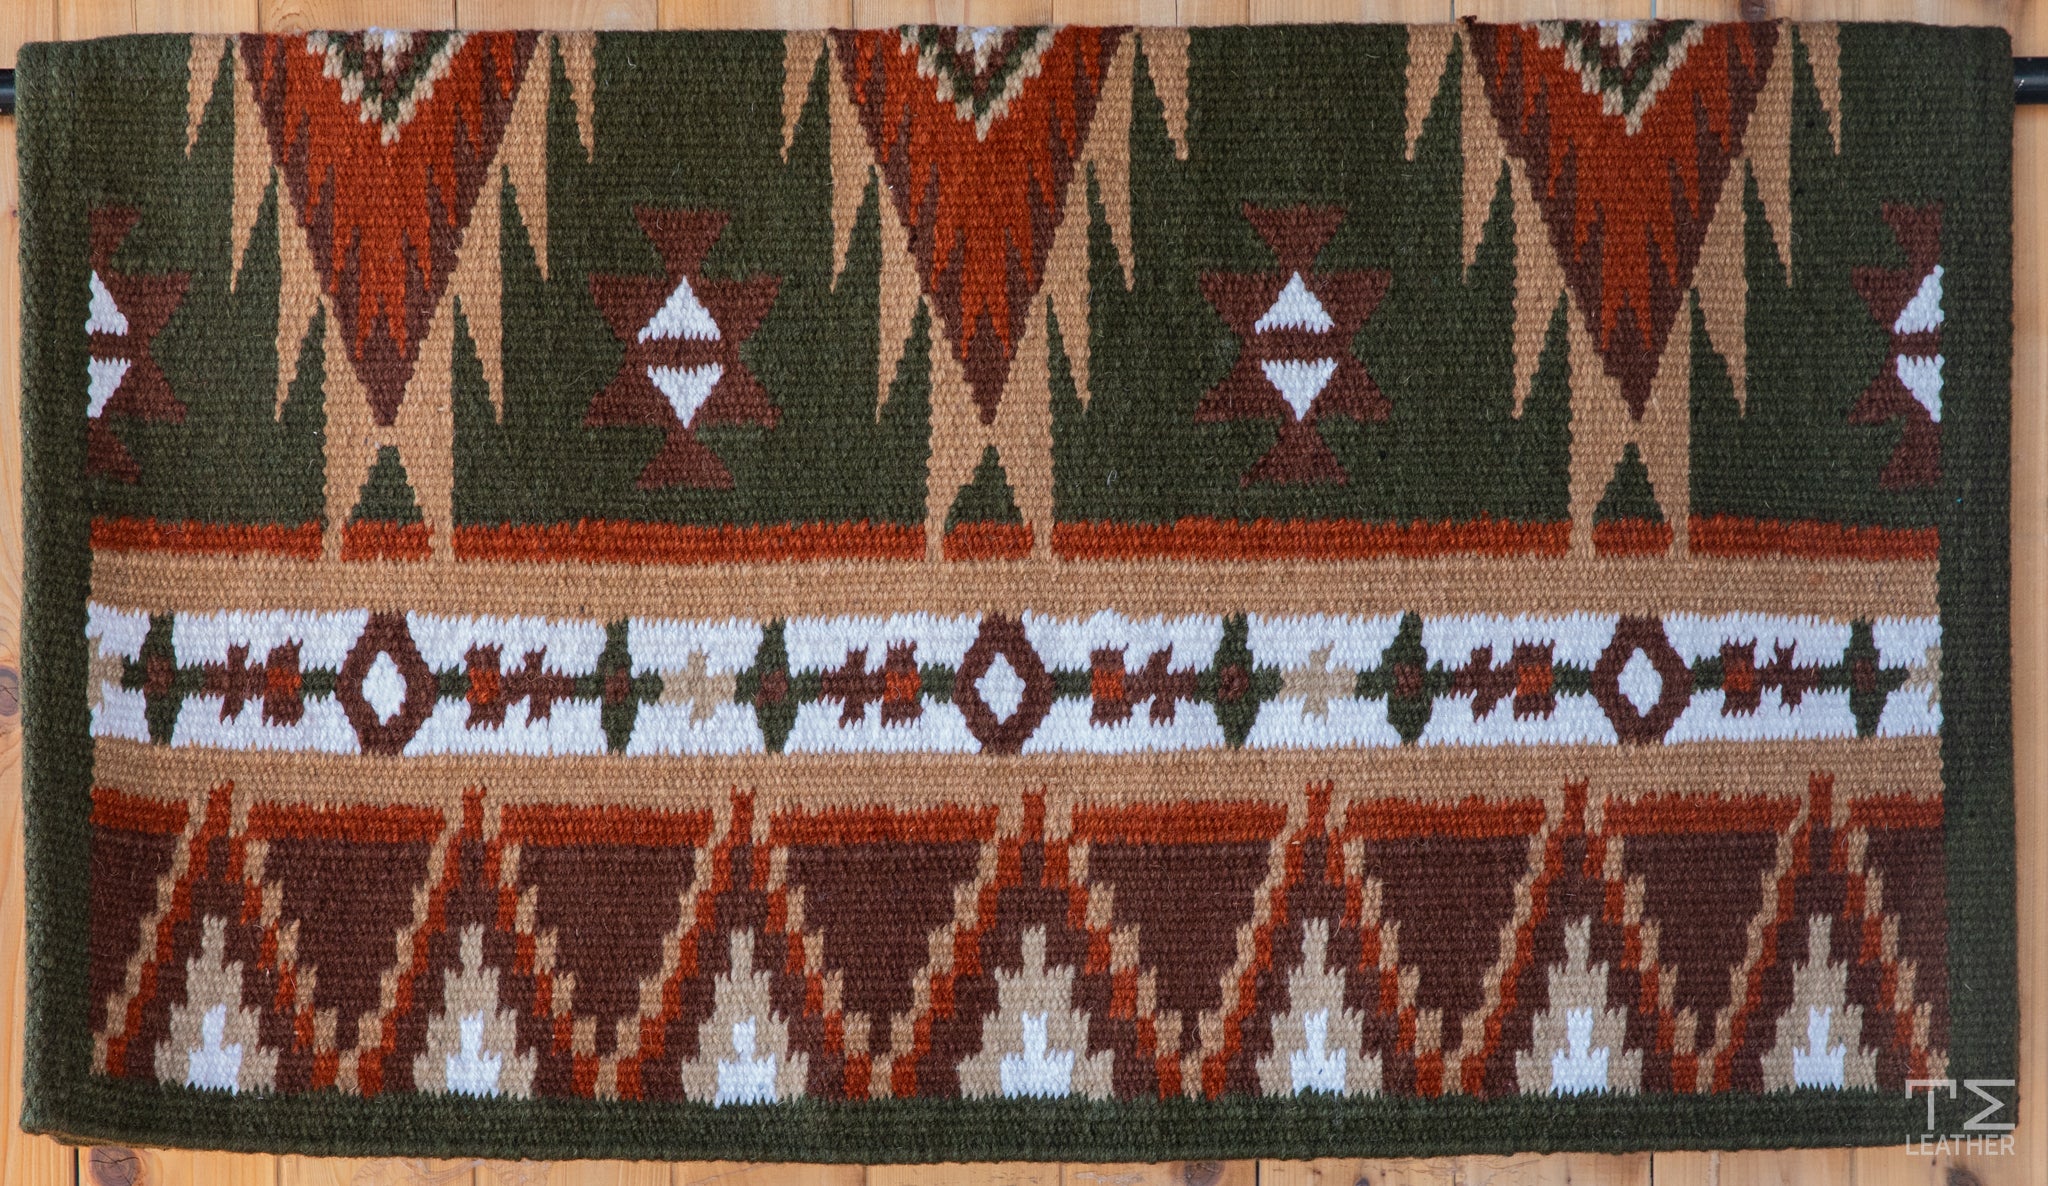 Olive Green, Brown, Sand, Rust w/ White Accents Flat Show Blanket